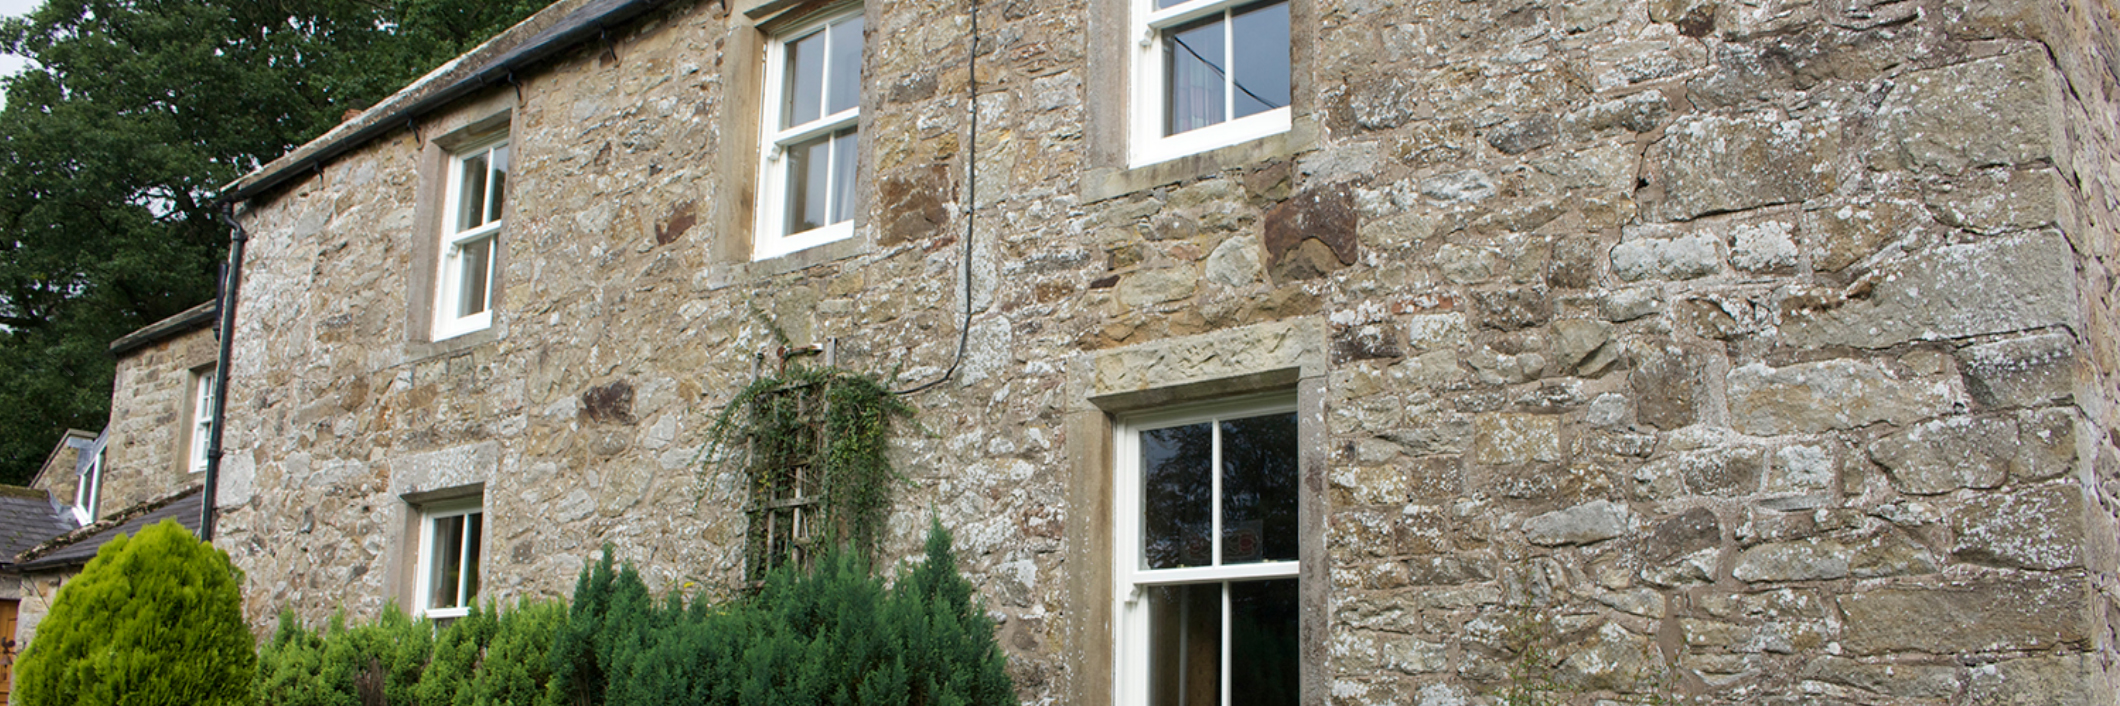 wooden sliding sash windows for listed property from ajd chapelhow